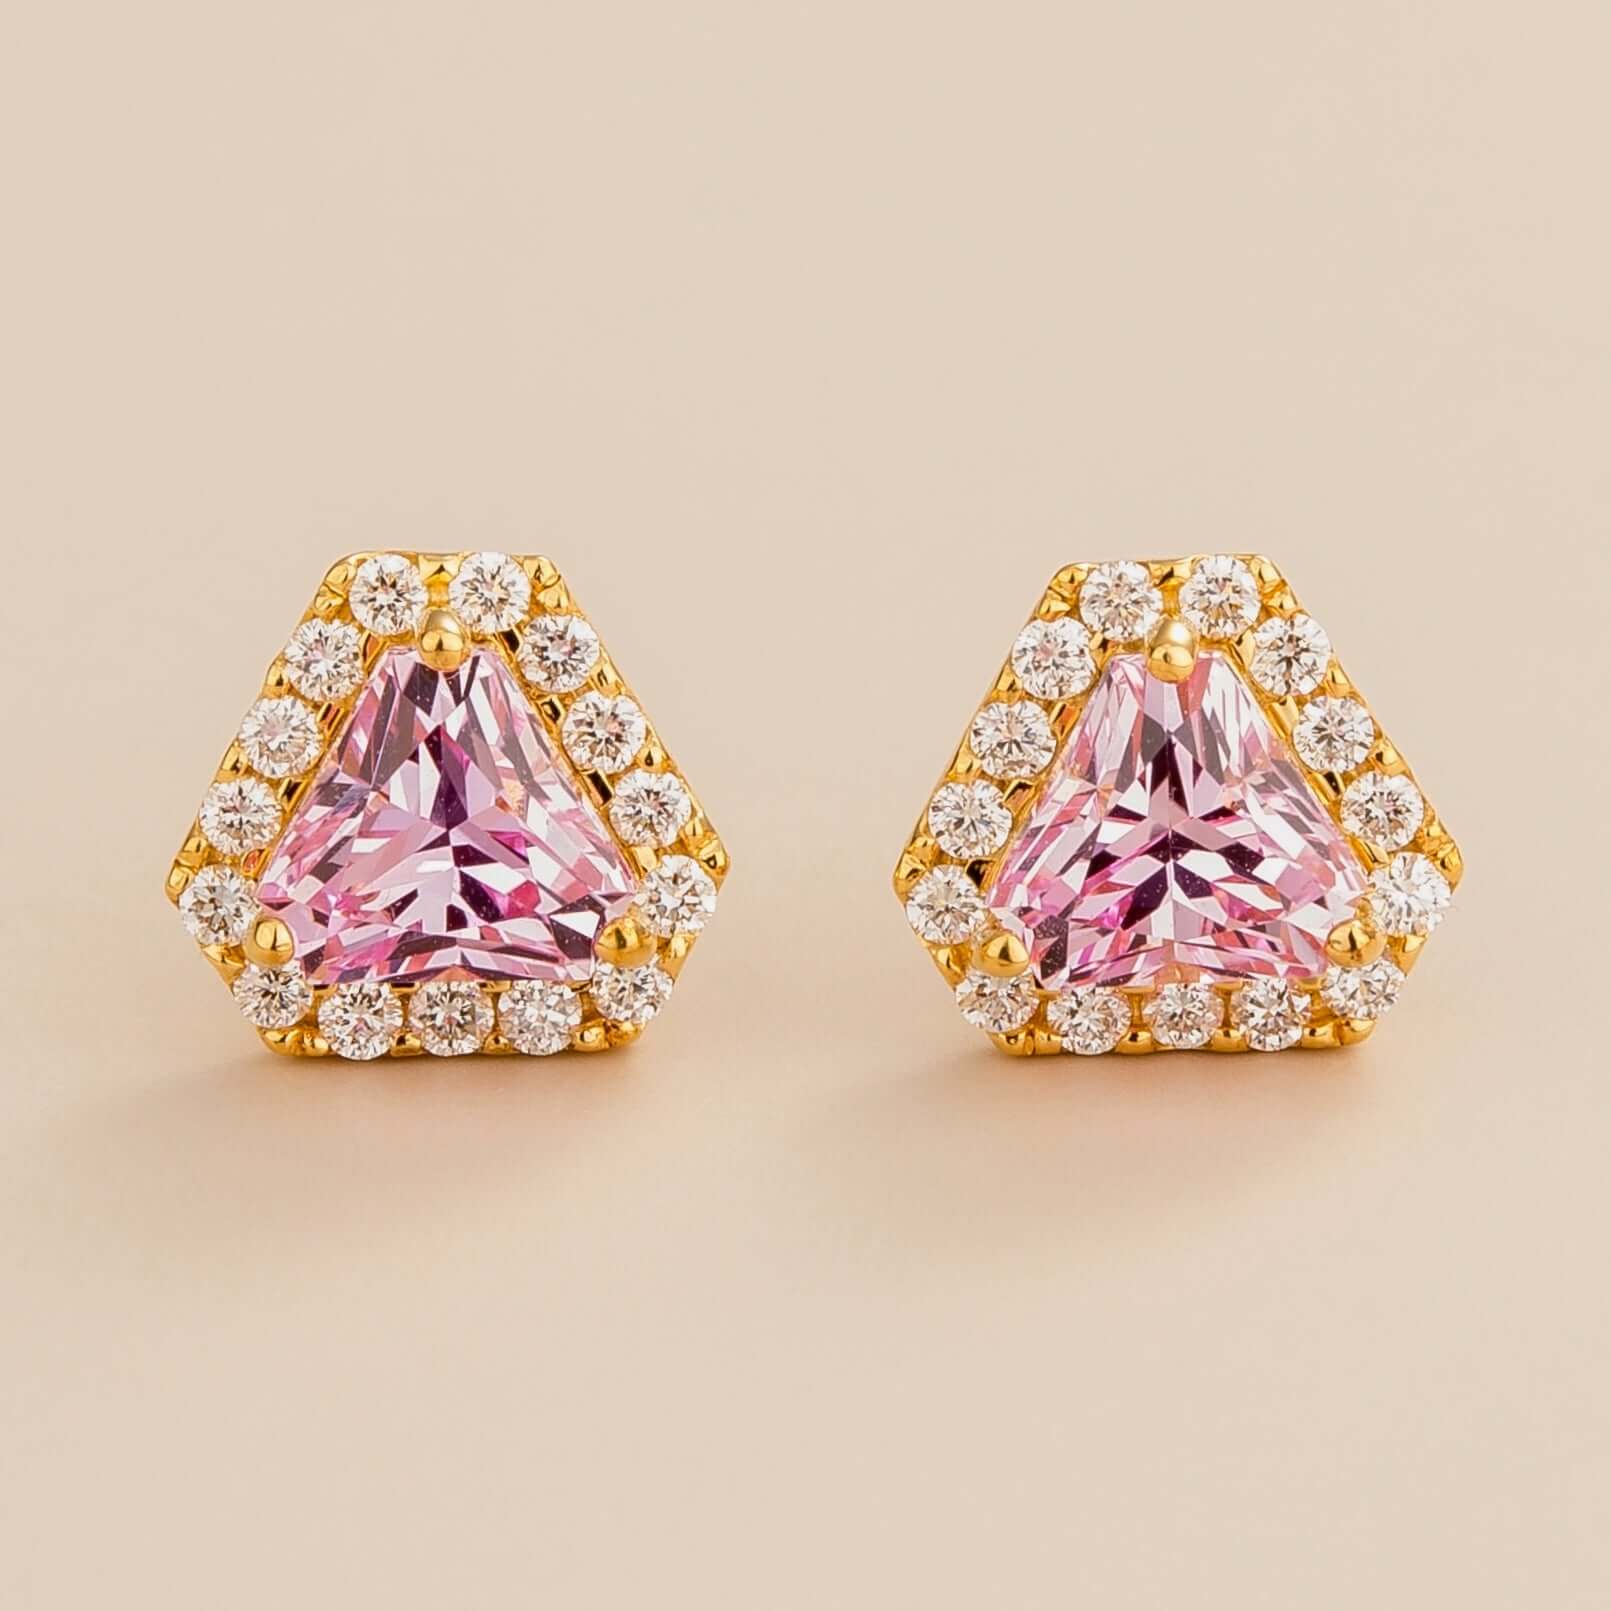 Diana earrings in 18K gold vermeil set with lab grown diamond and triangle Pink Sapphire gem stones.